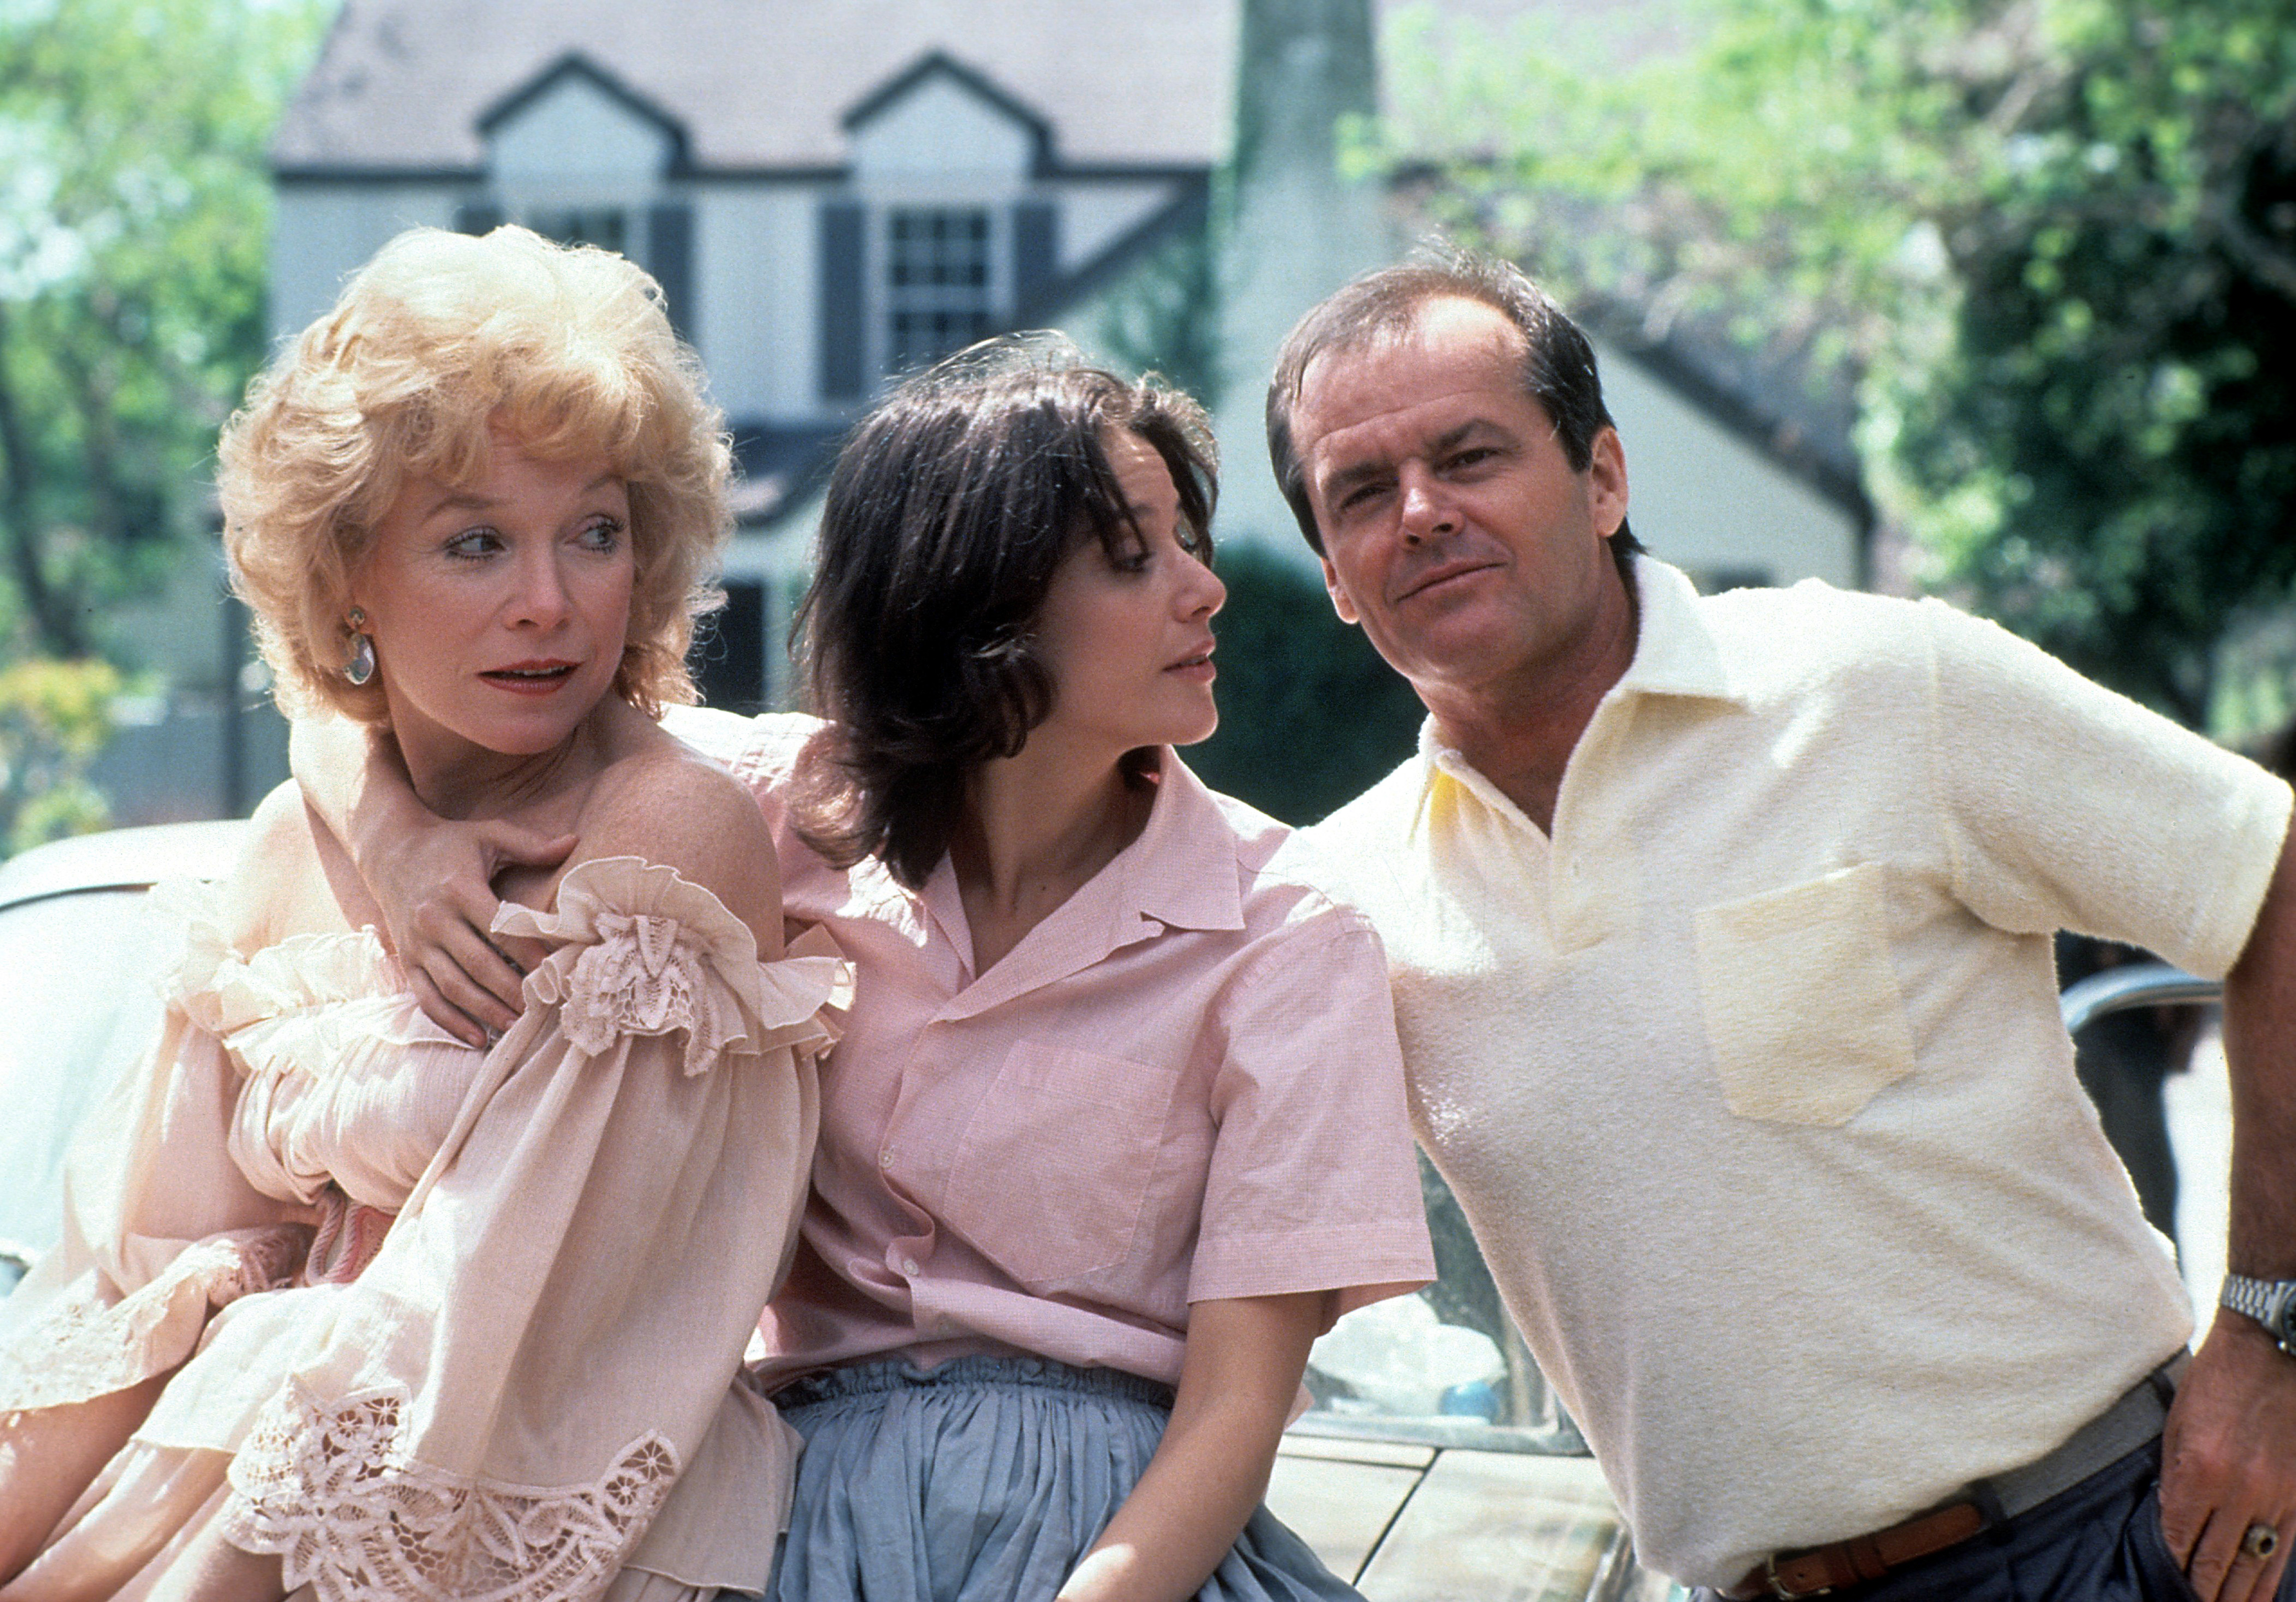 Shirley MacLaine, Debra Winger and Jack Nicholson on the set of "Terms of Endearment," in 1983. | Source: Getty Images